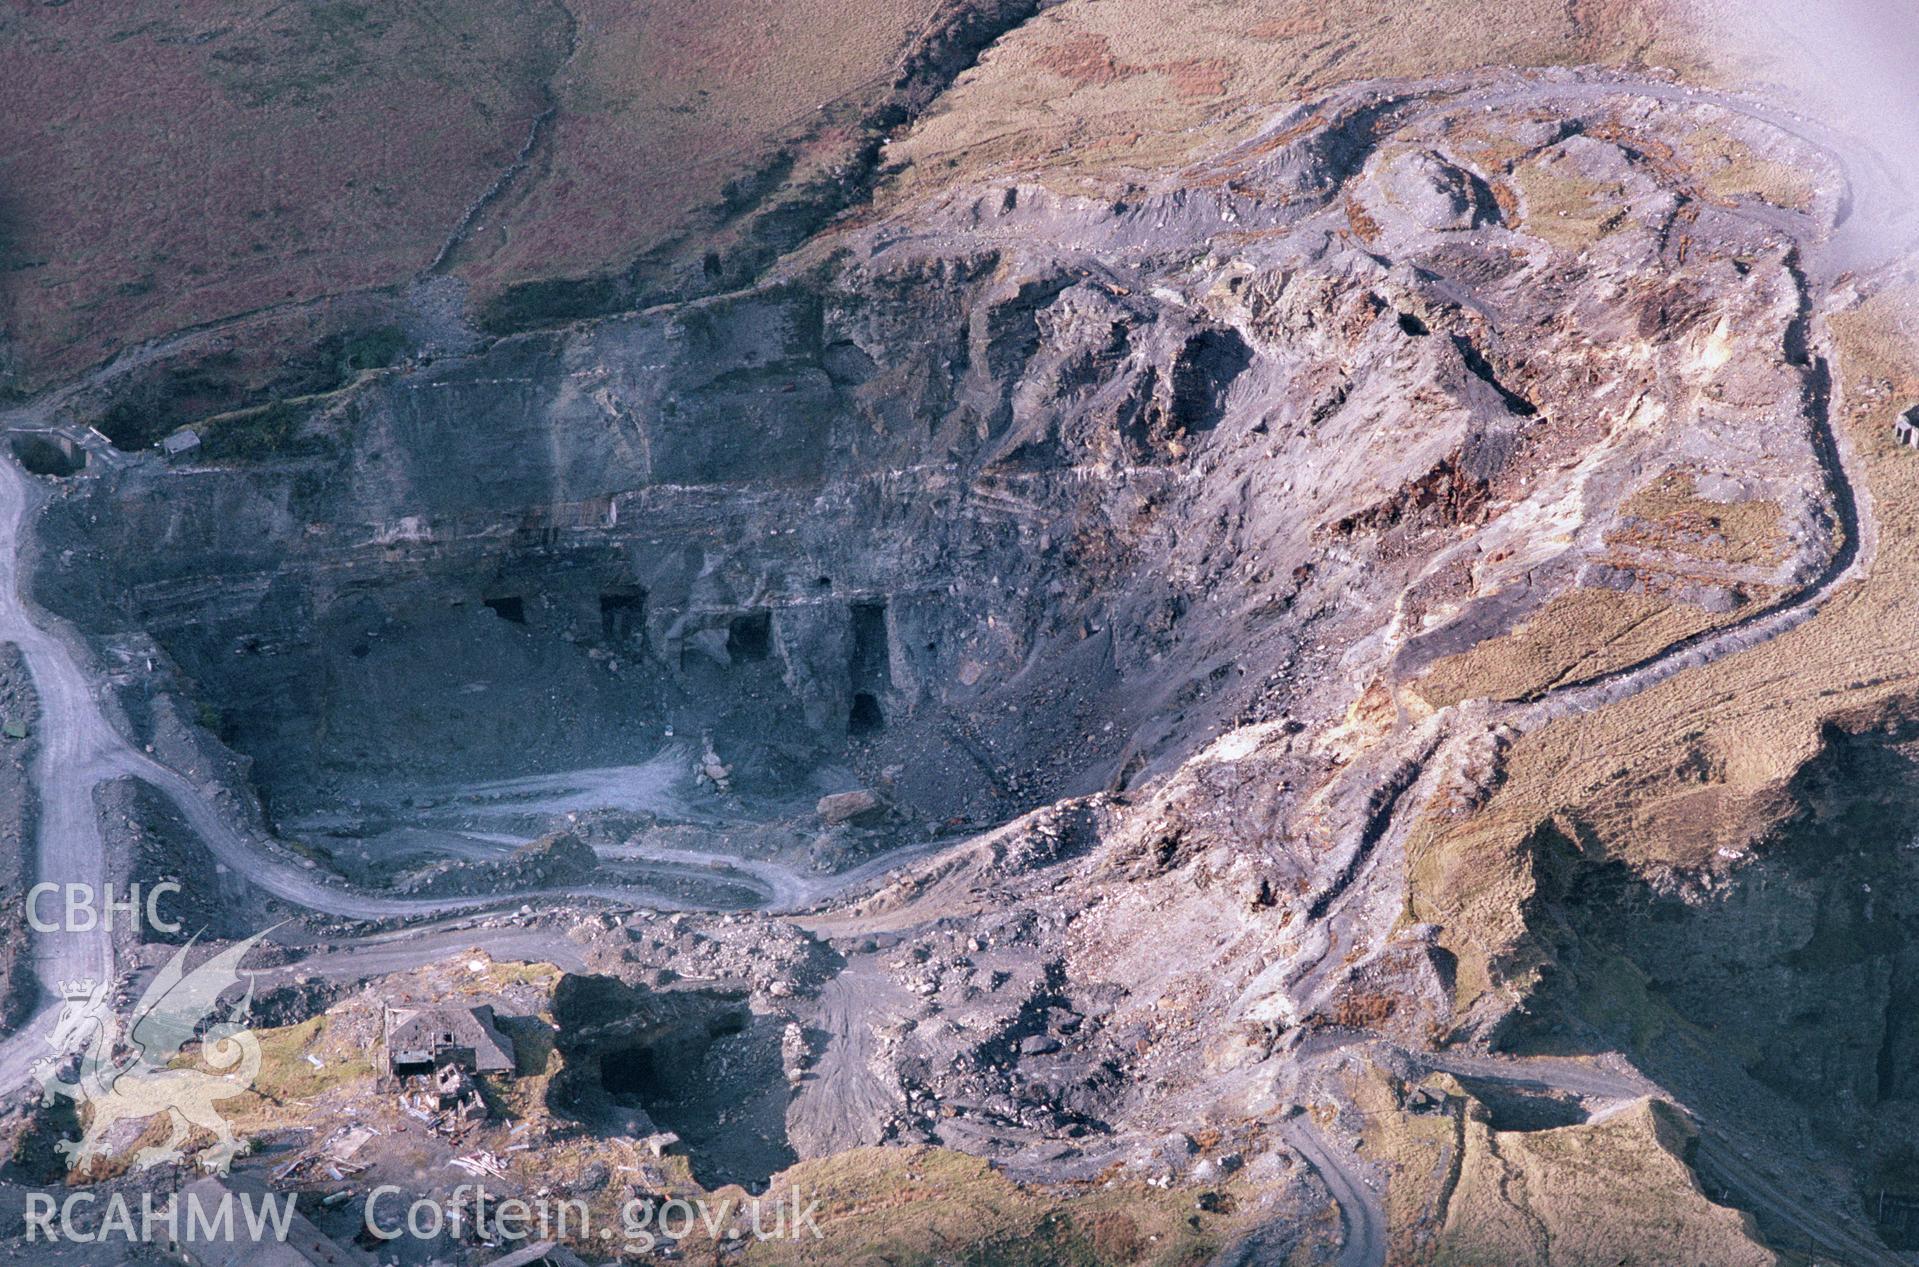 Slide of RCAHMW colour oblique aerial photograph of Llechwedd Slate Caverns, taken by C.R. Musson, 17/4/1994.